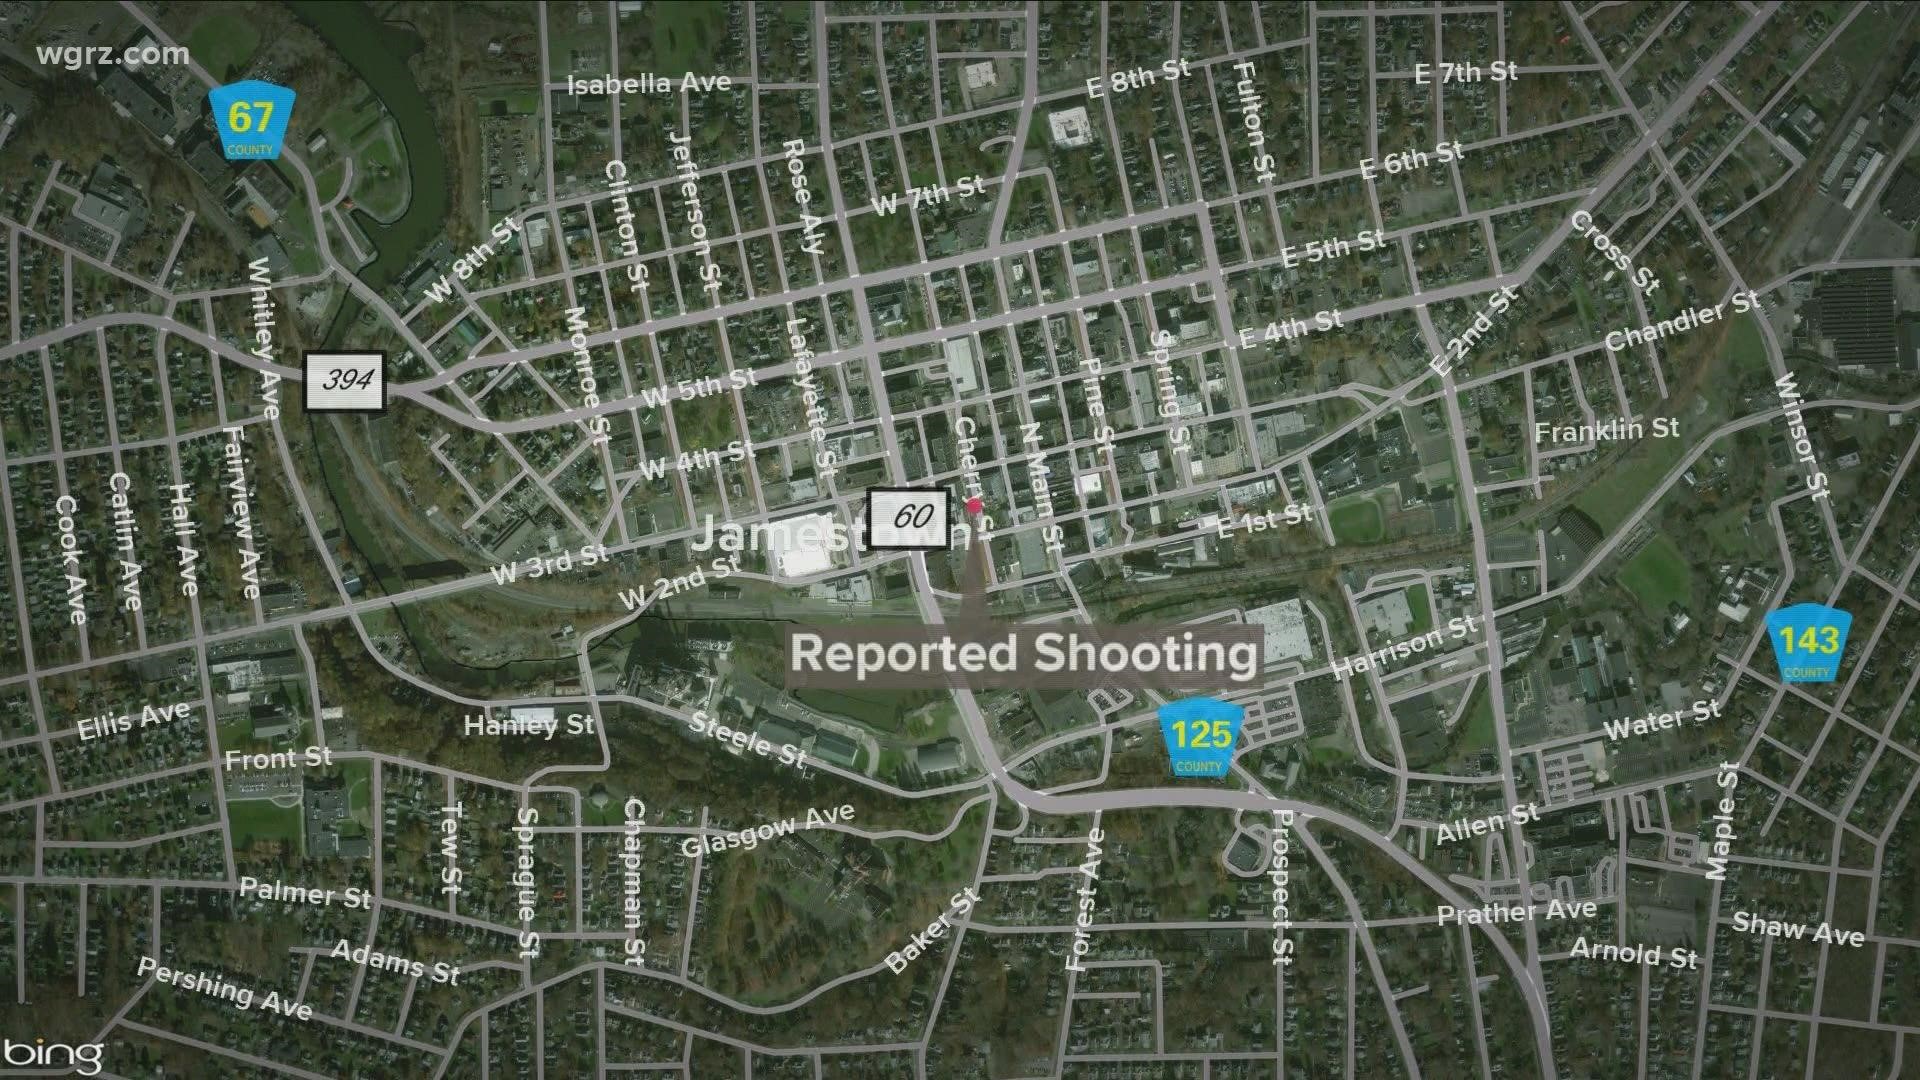 Jamestown Police say a man is recovering after he was shot several times in the lower body during a big event on Cherry Street.